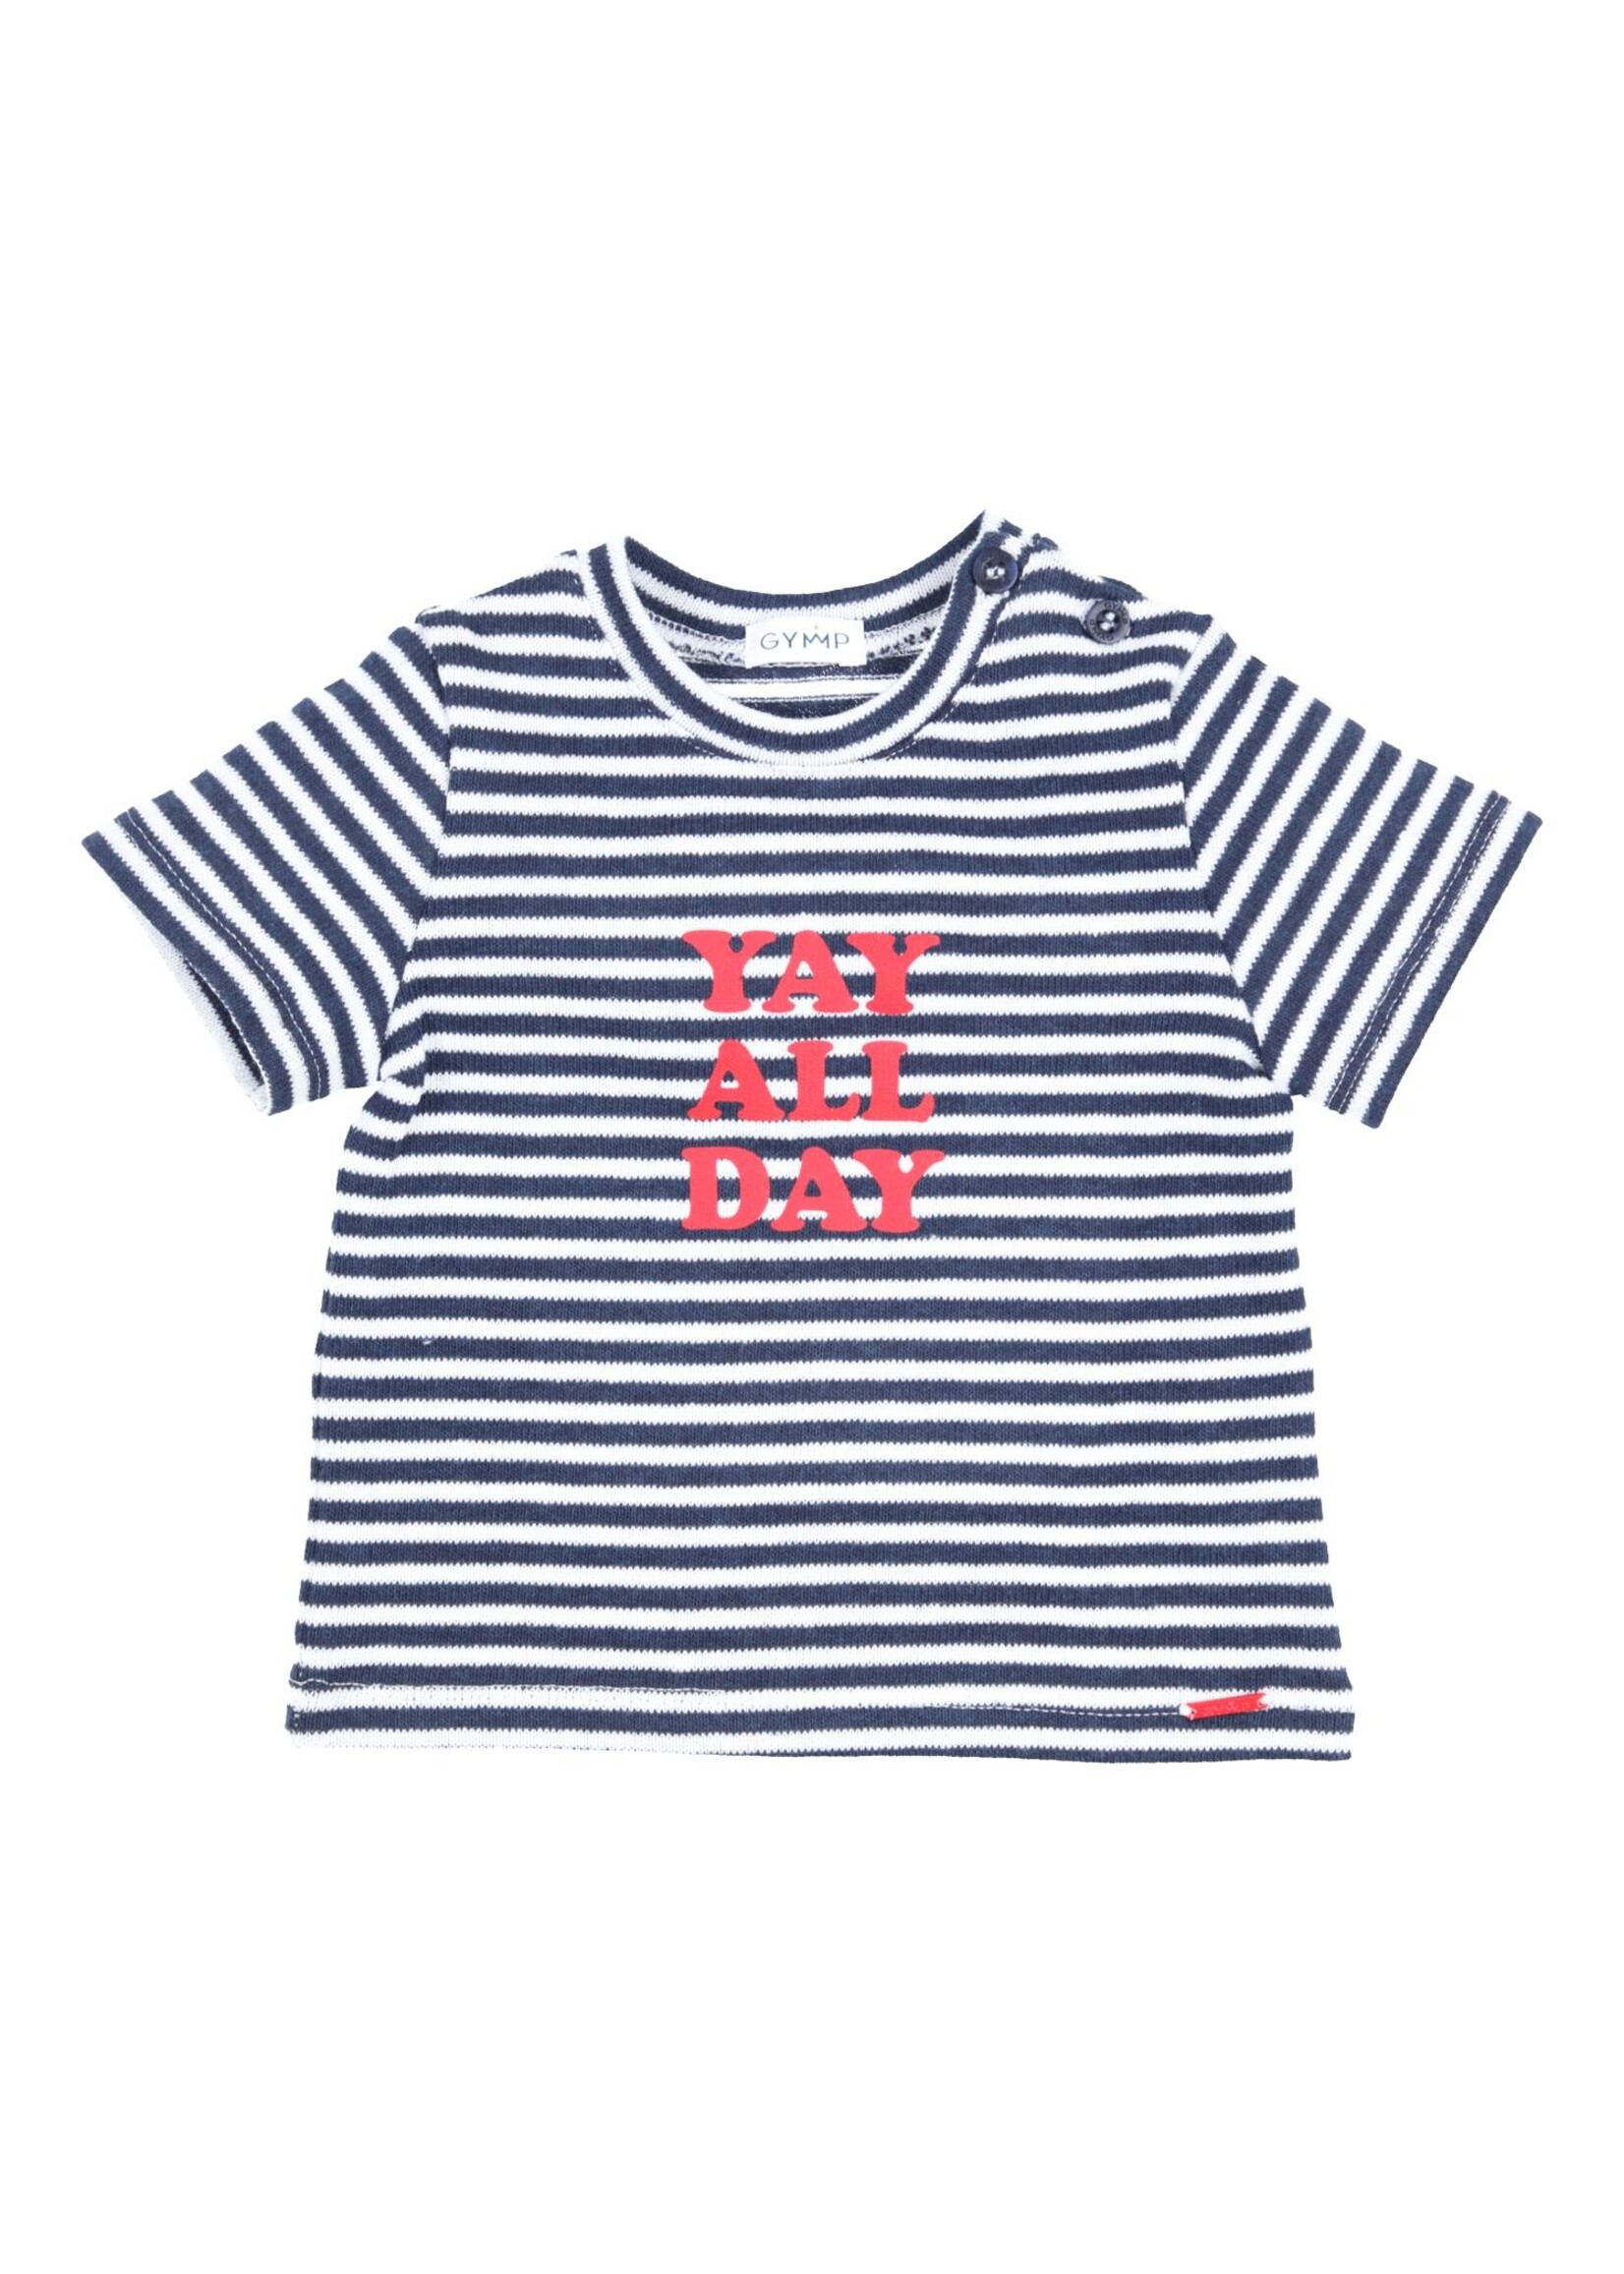 Gymp Boys T-shirt Hook Yay all Day 353-4383-20 Navy - White